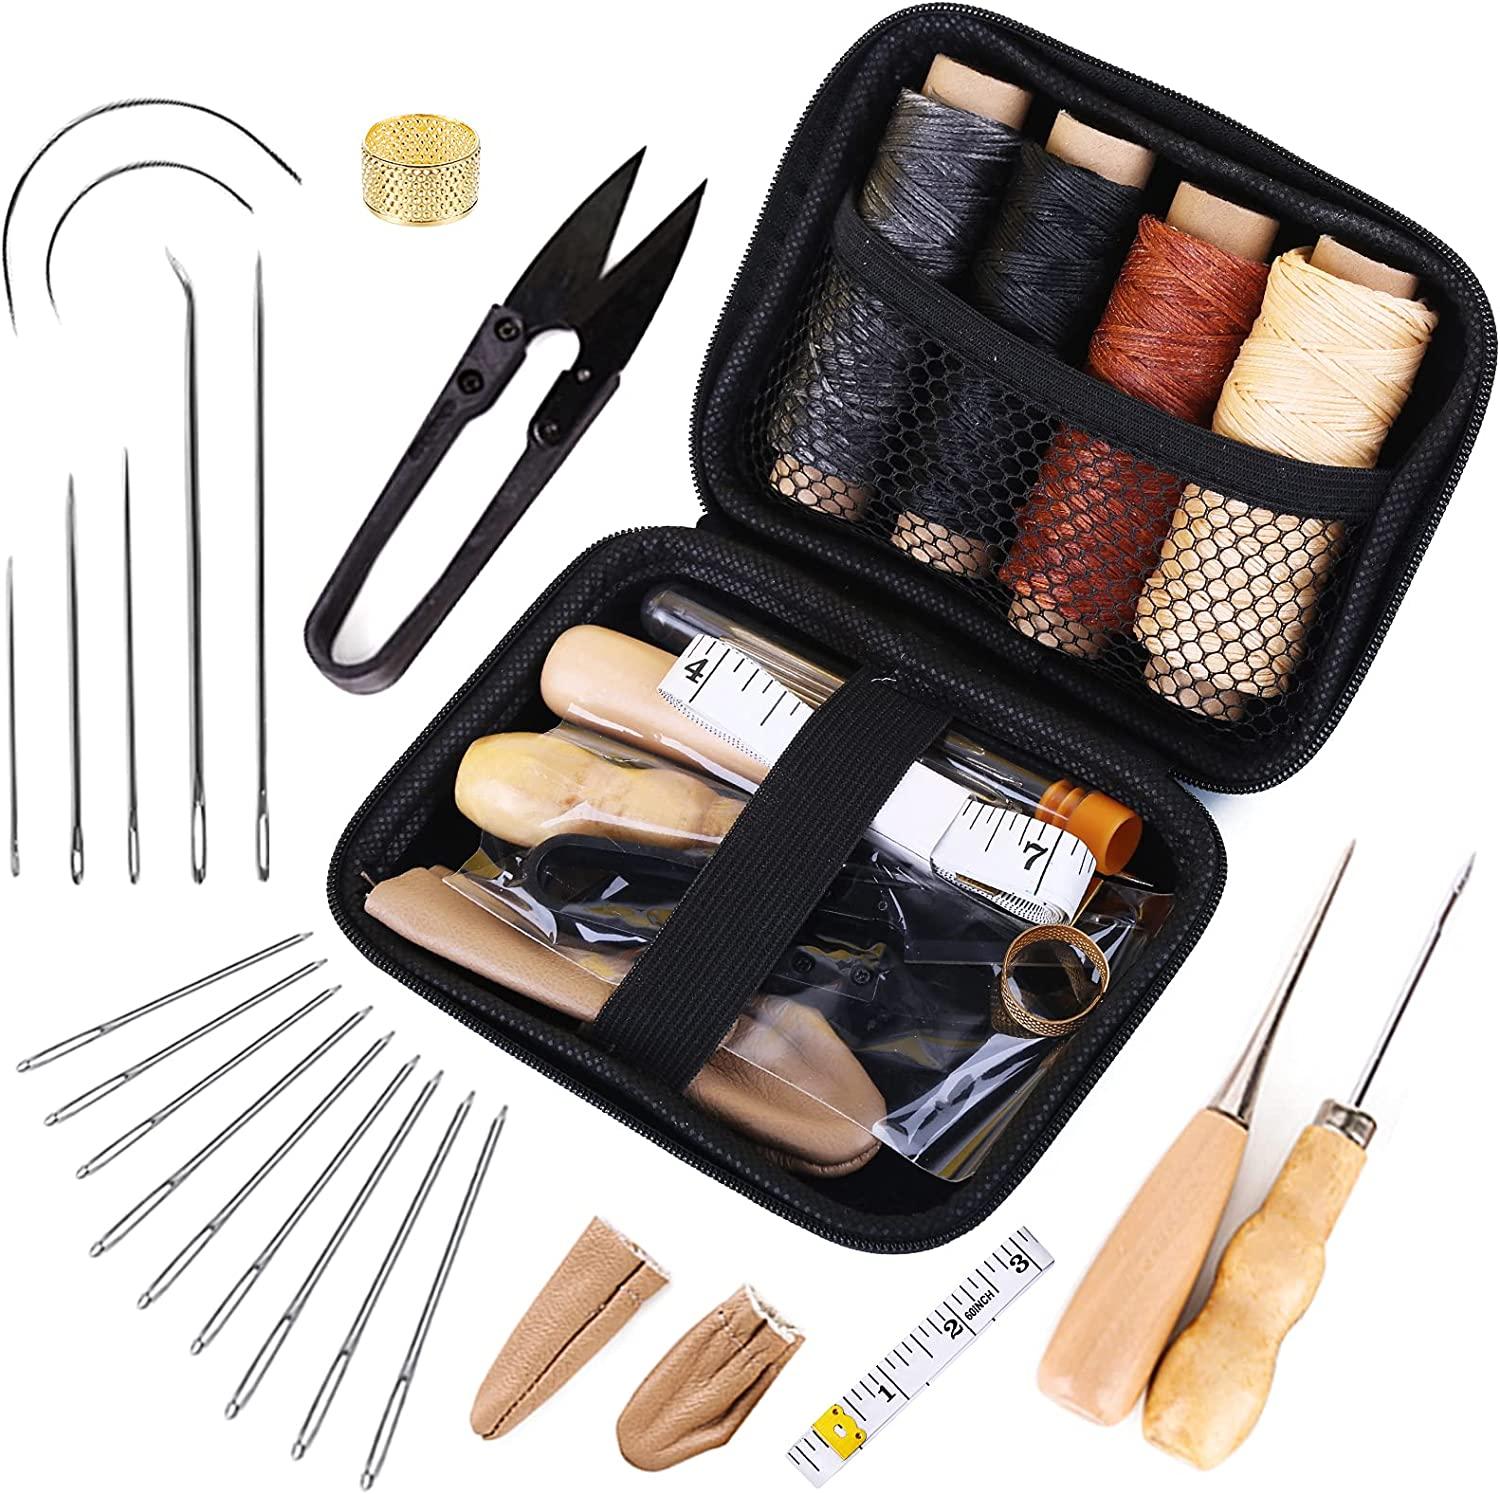 IMZAY 28 PCS Leather Sewing Kit With Large-Eye Stitching Needles Waxed  Thread Leather Sewing Tools For DIY Leather Craft